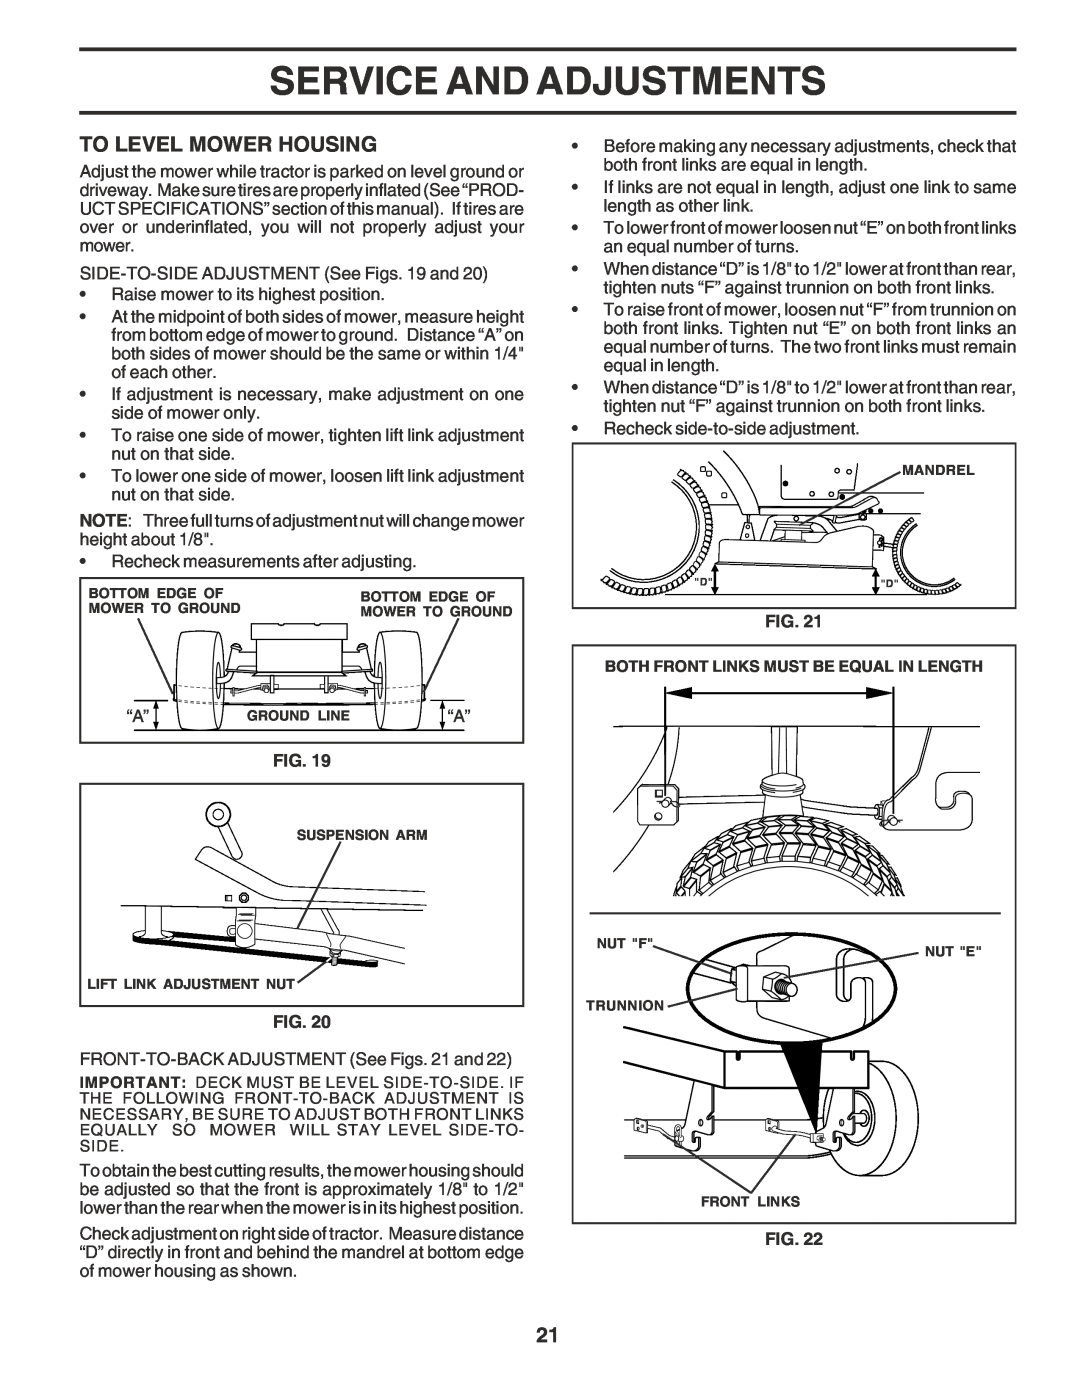 Poulan PR185H42STG owner manual To Level Mower Housing, Service And Adjustments, Both Front Links Must Be Equal In Length 